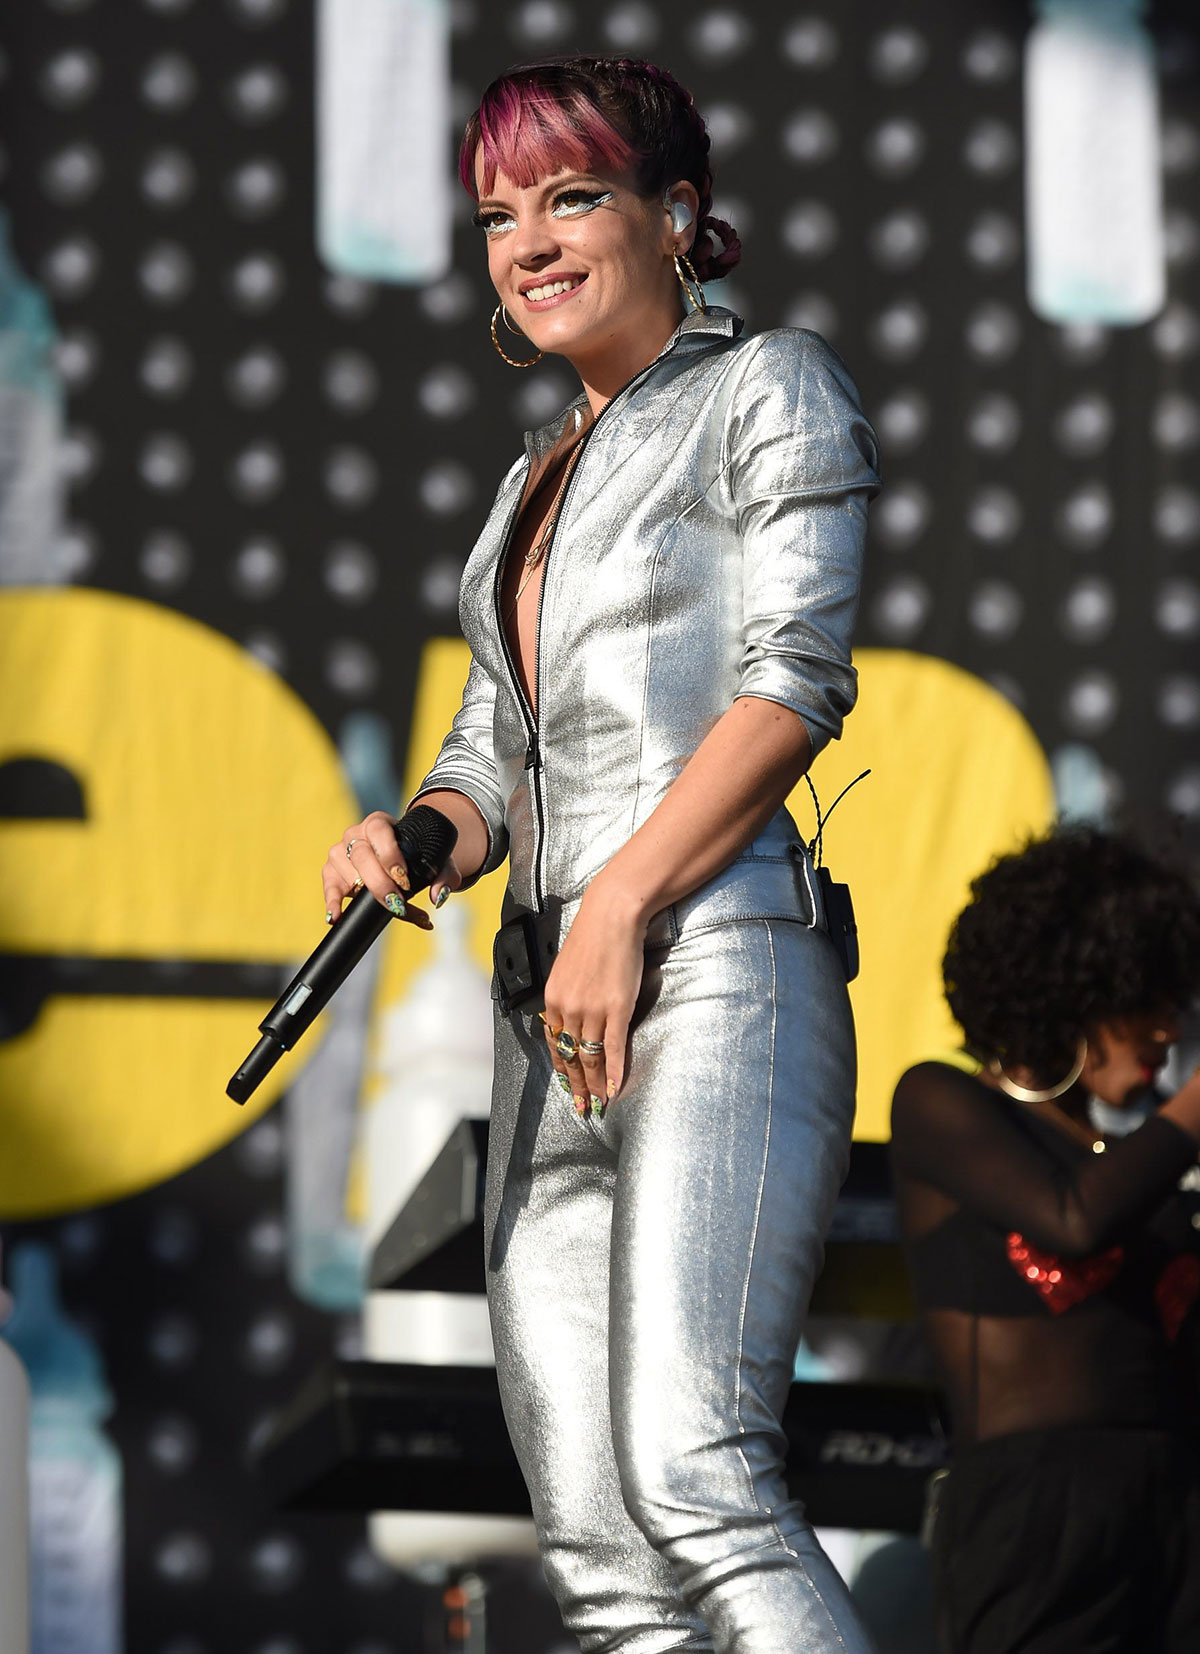 Lily Allen performance candids at the V Festival